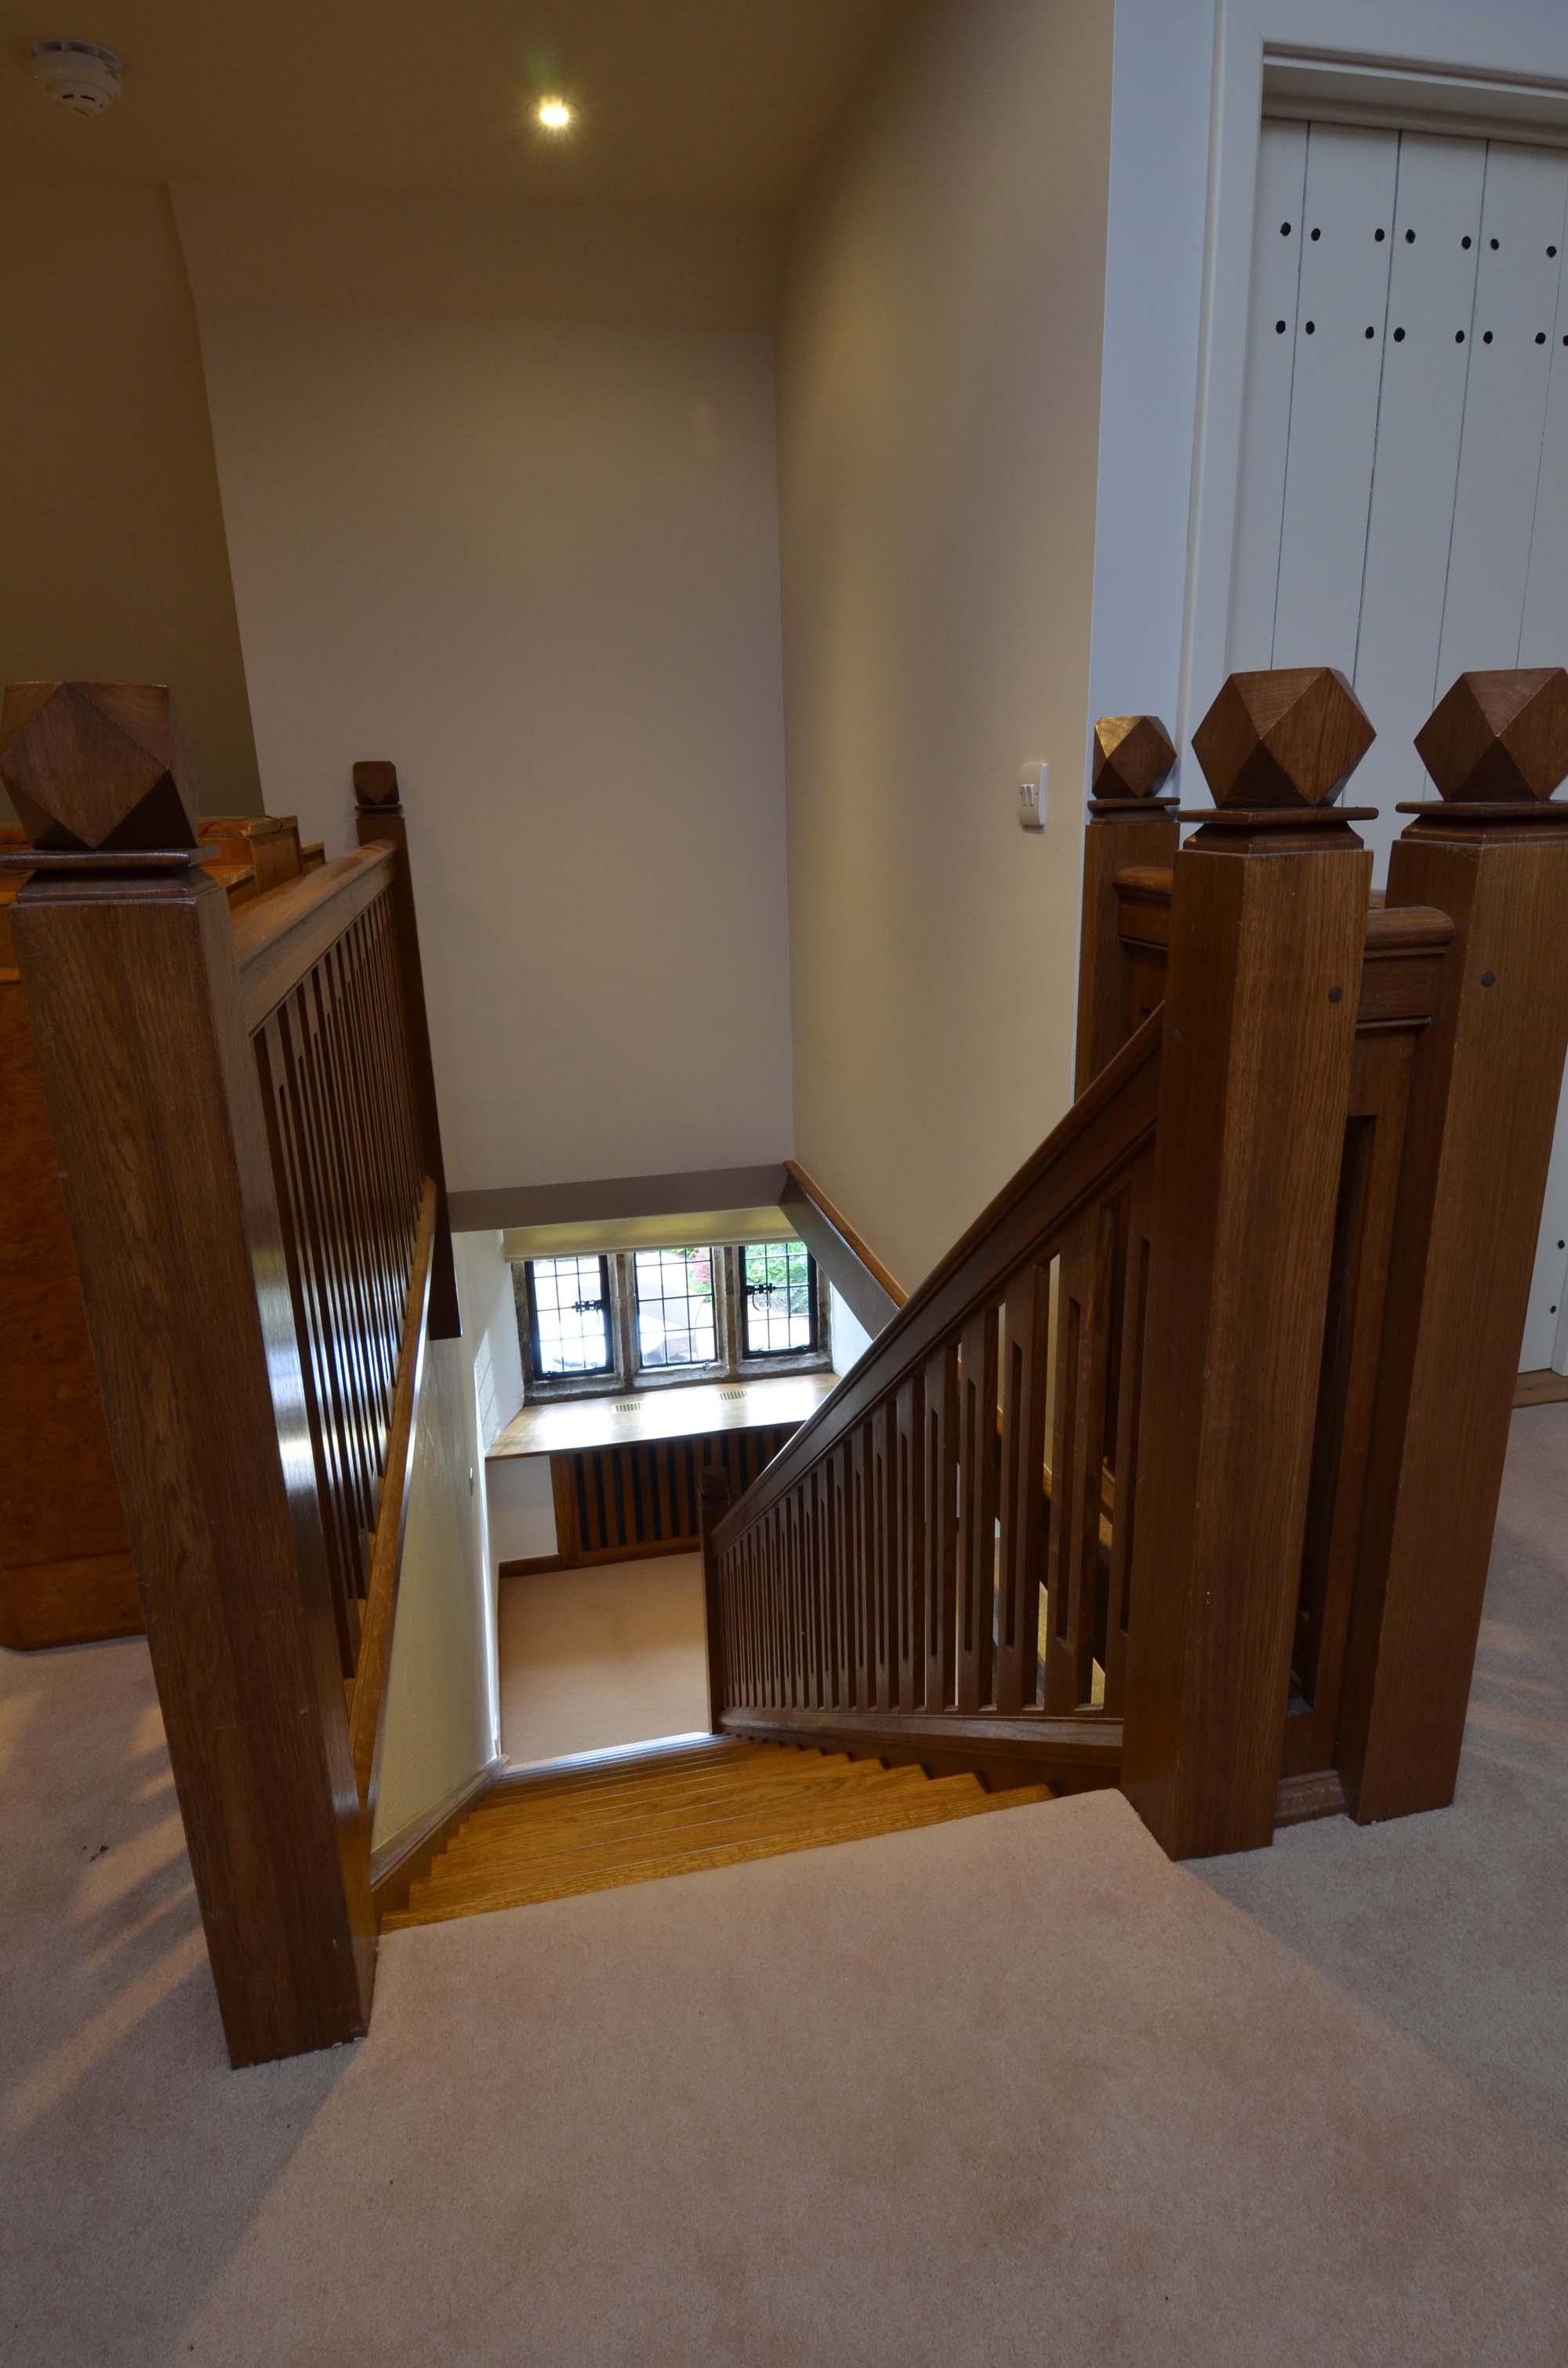 29 Period style staircase hand made in solid oak with period mouldings and oak handrail.jpg